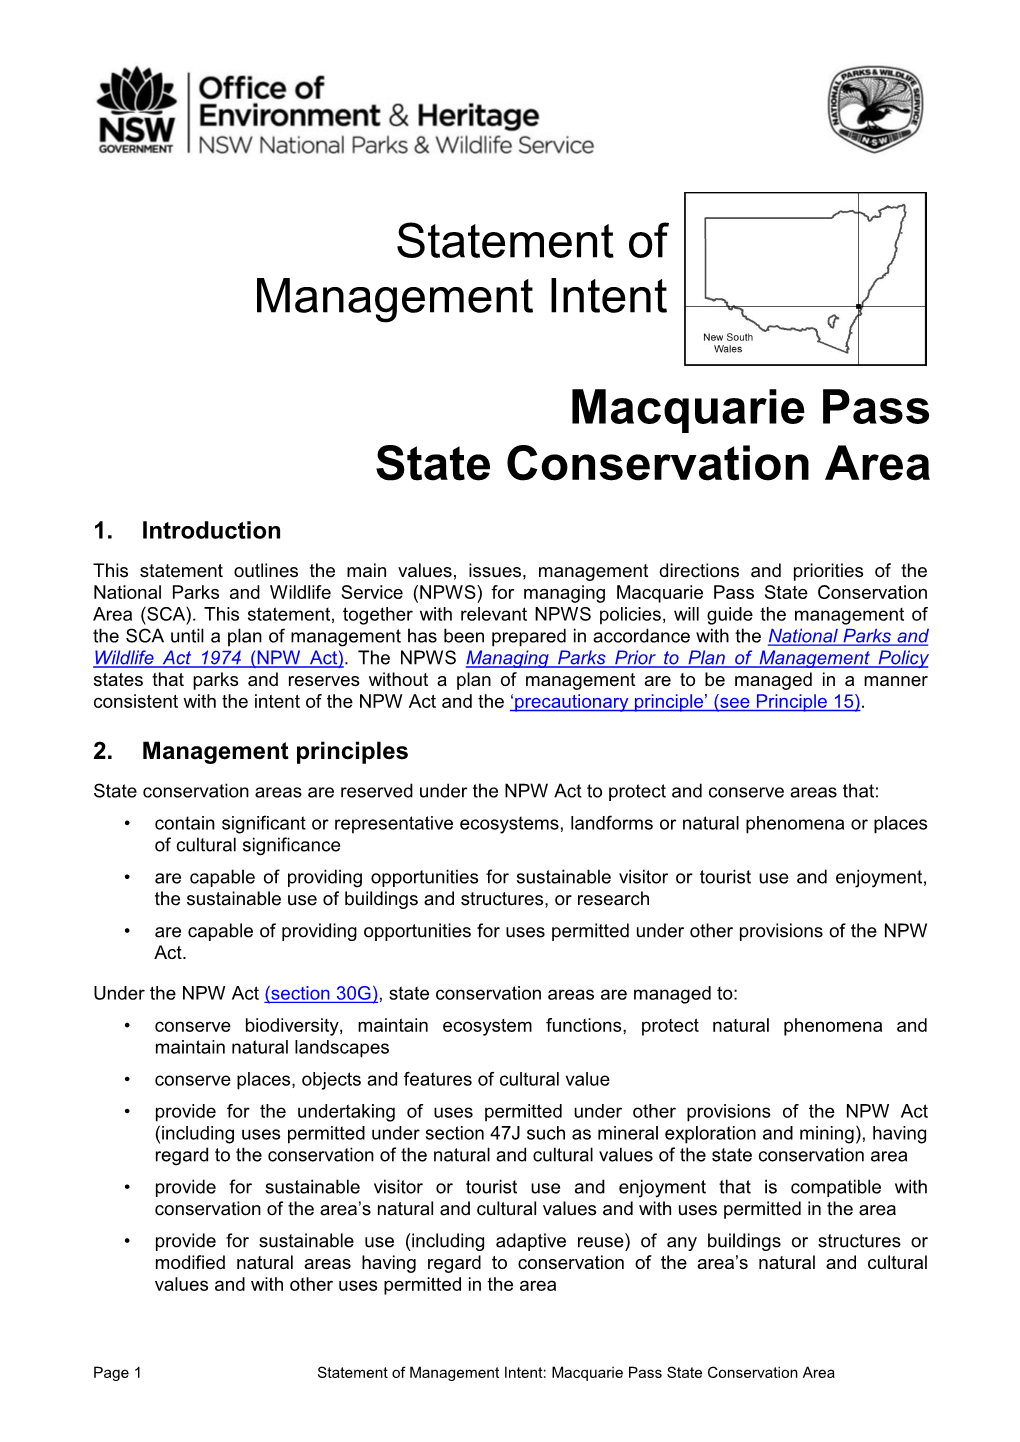 Macquarie Pass State Conservation Area